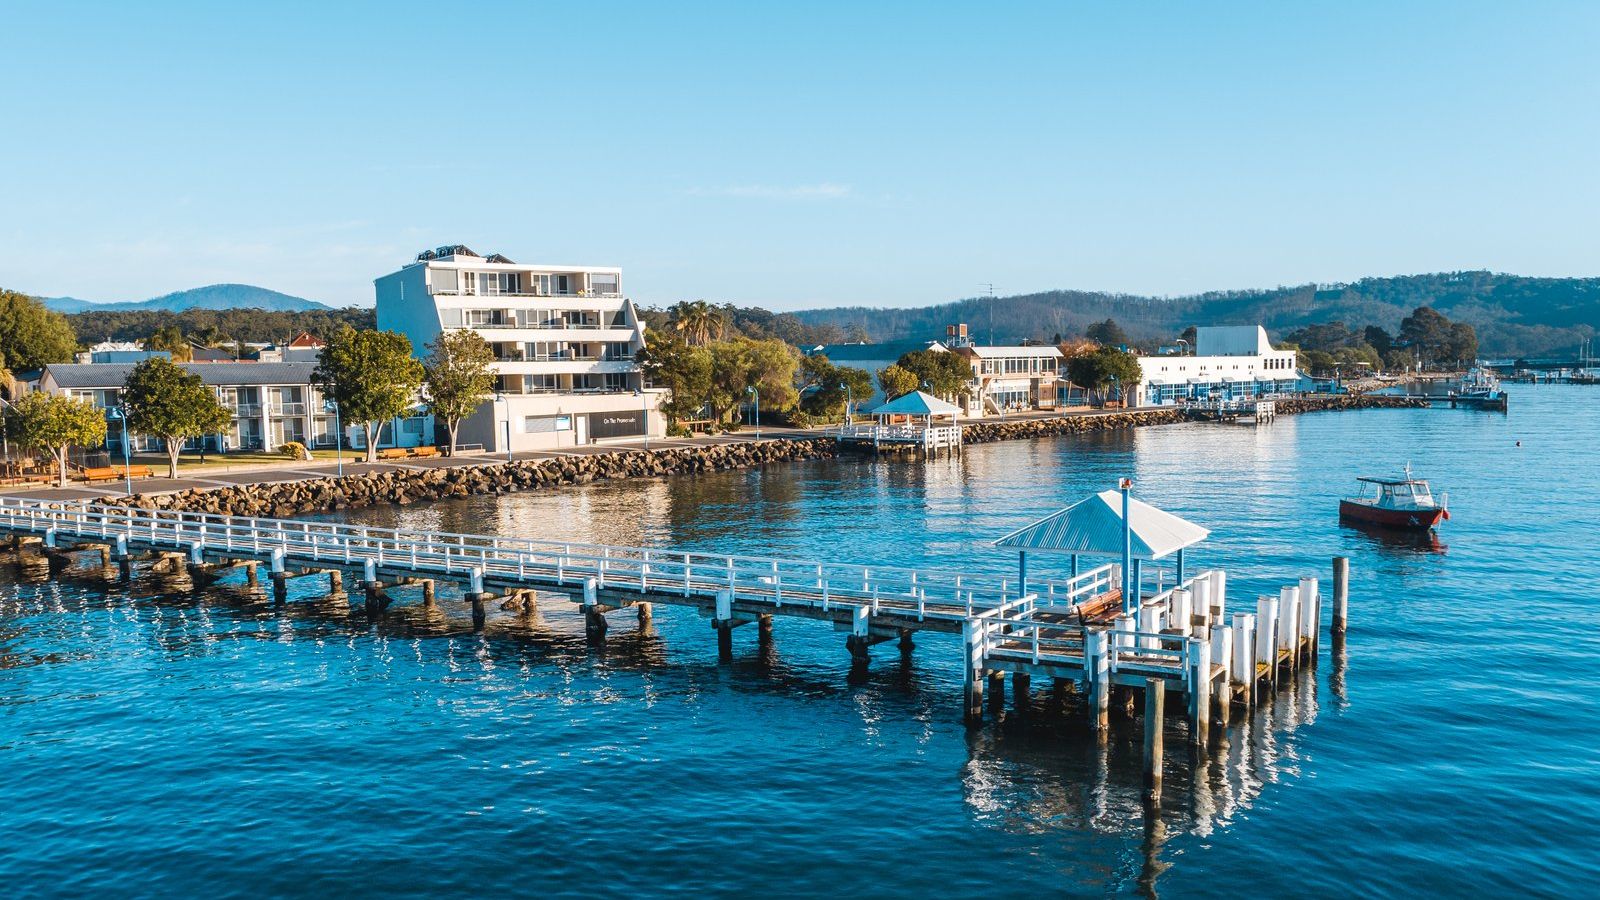 Batemans Bay waterfront with shops and jetty alongside the water banner image